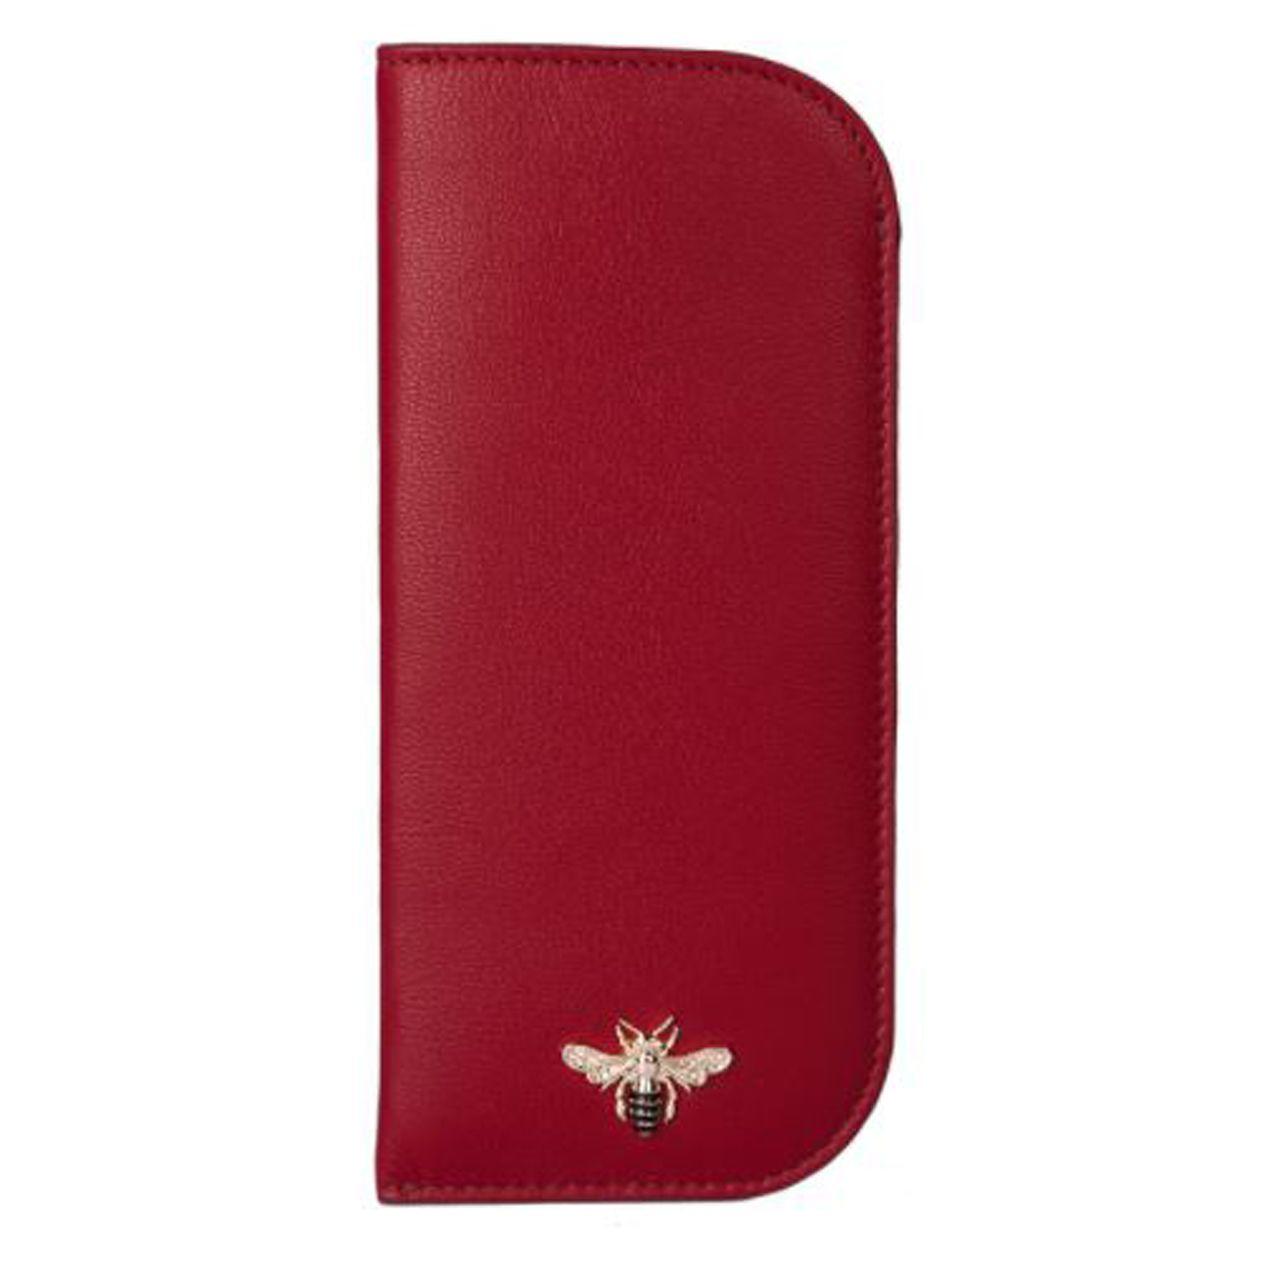 Bee Motif Soft Leather Slip Case Red